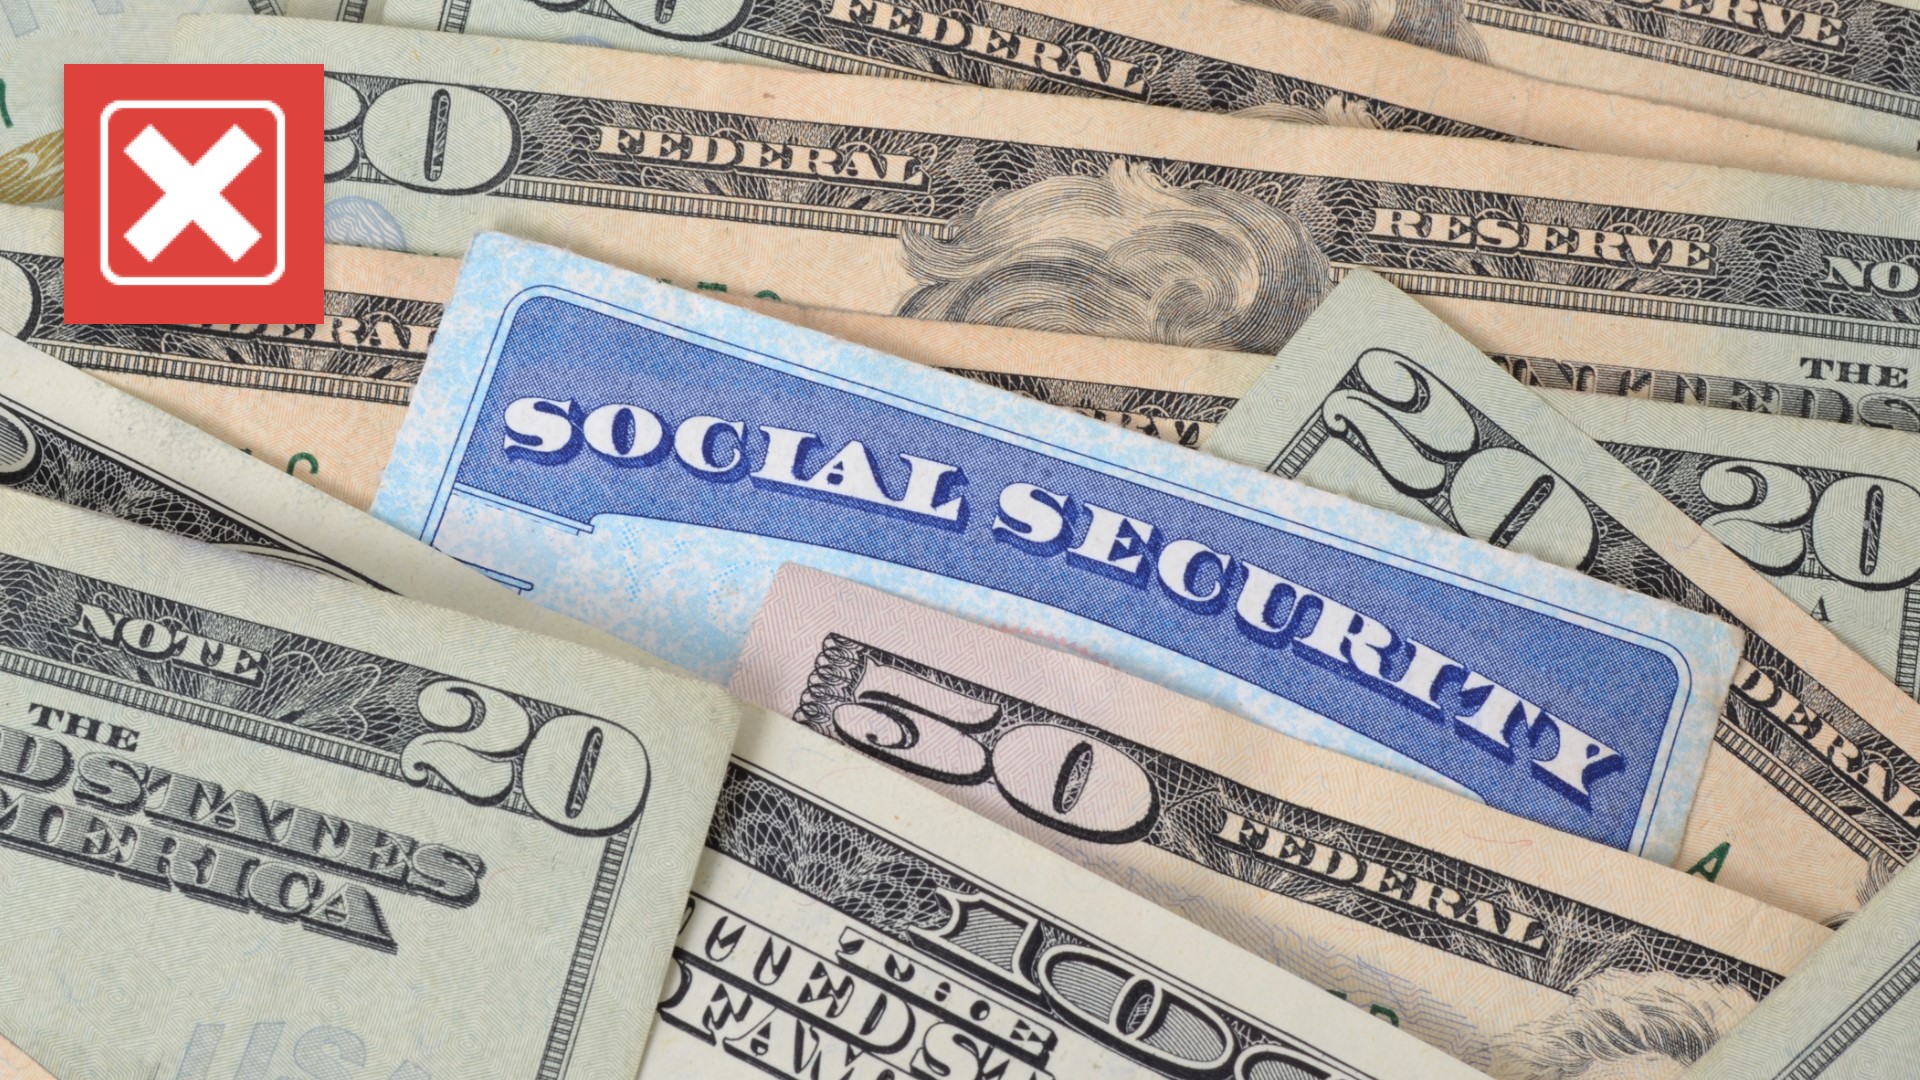 The common claim that Social Security will run out of money in a decade is misleading. But without action, payments could outpace payroll tax revenue.